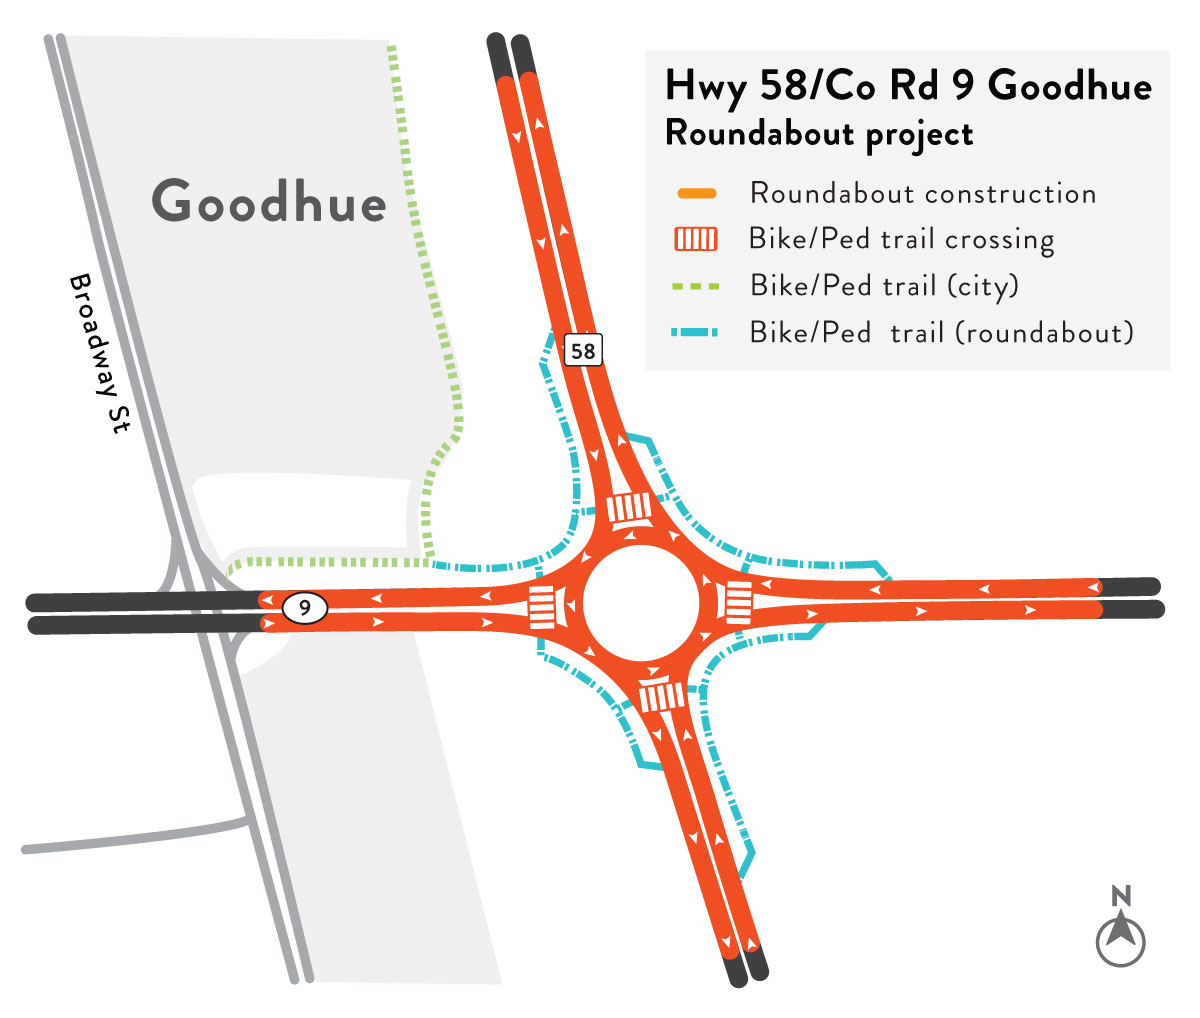 Hwy 58 and Co. Rd. 9 roundabout project map